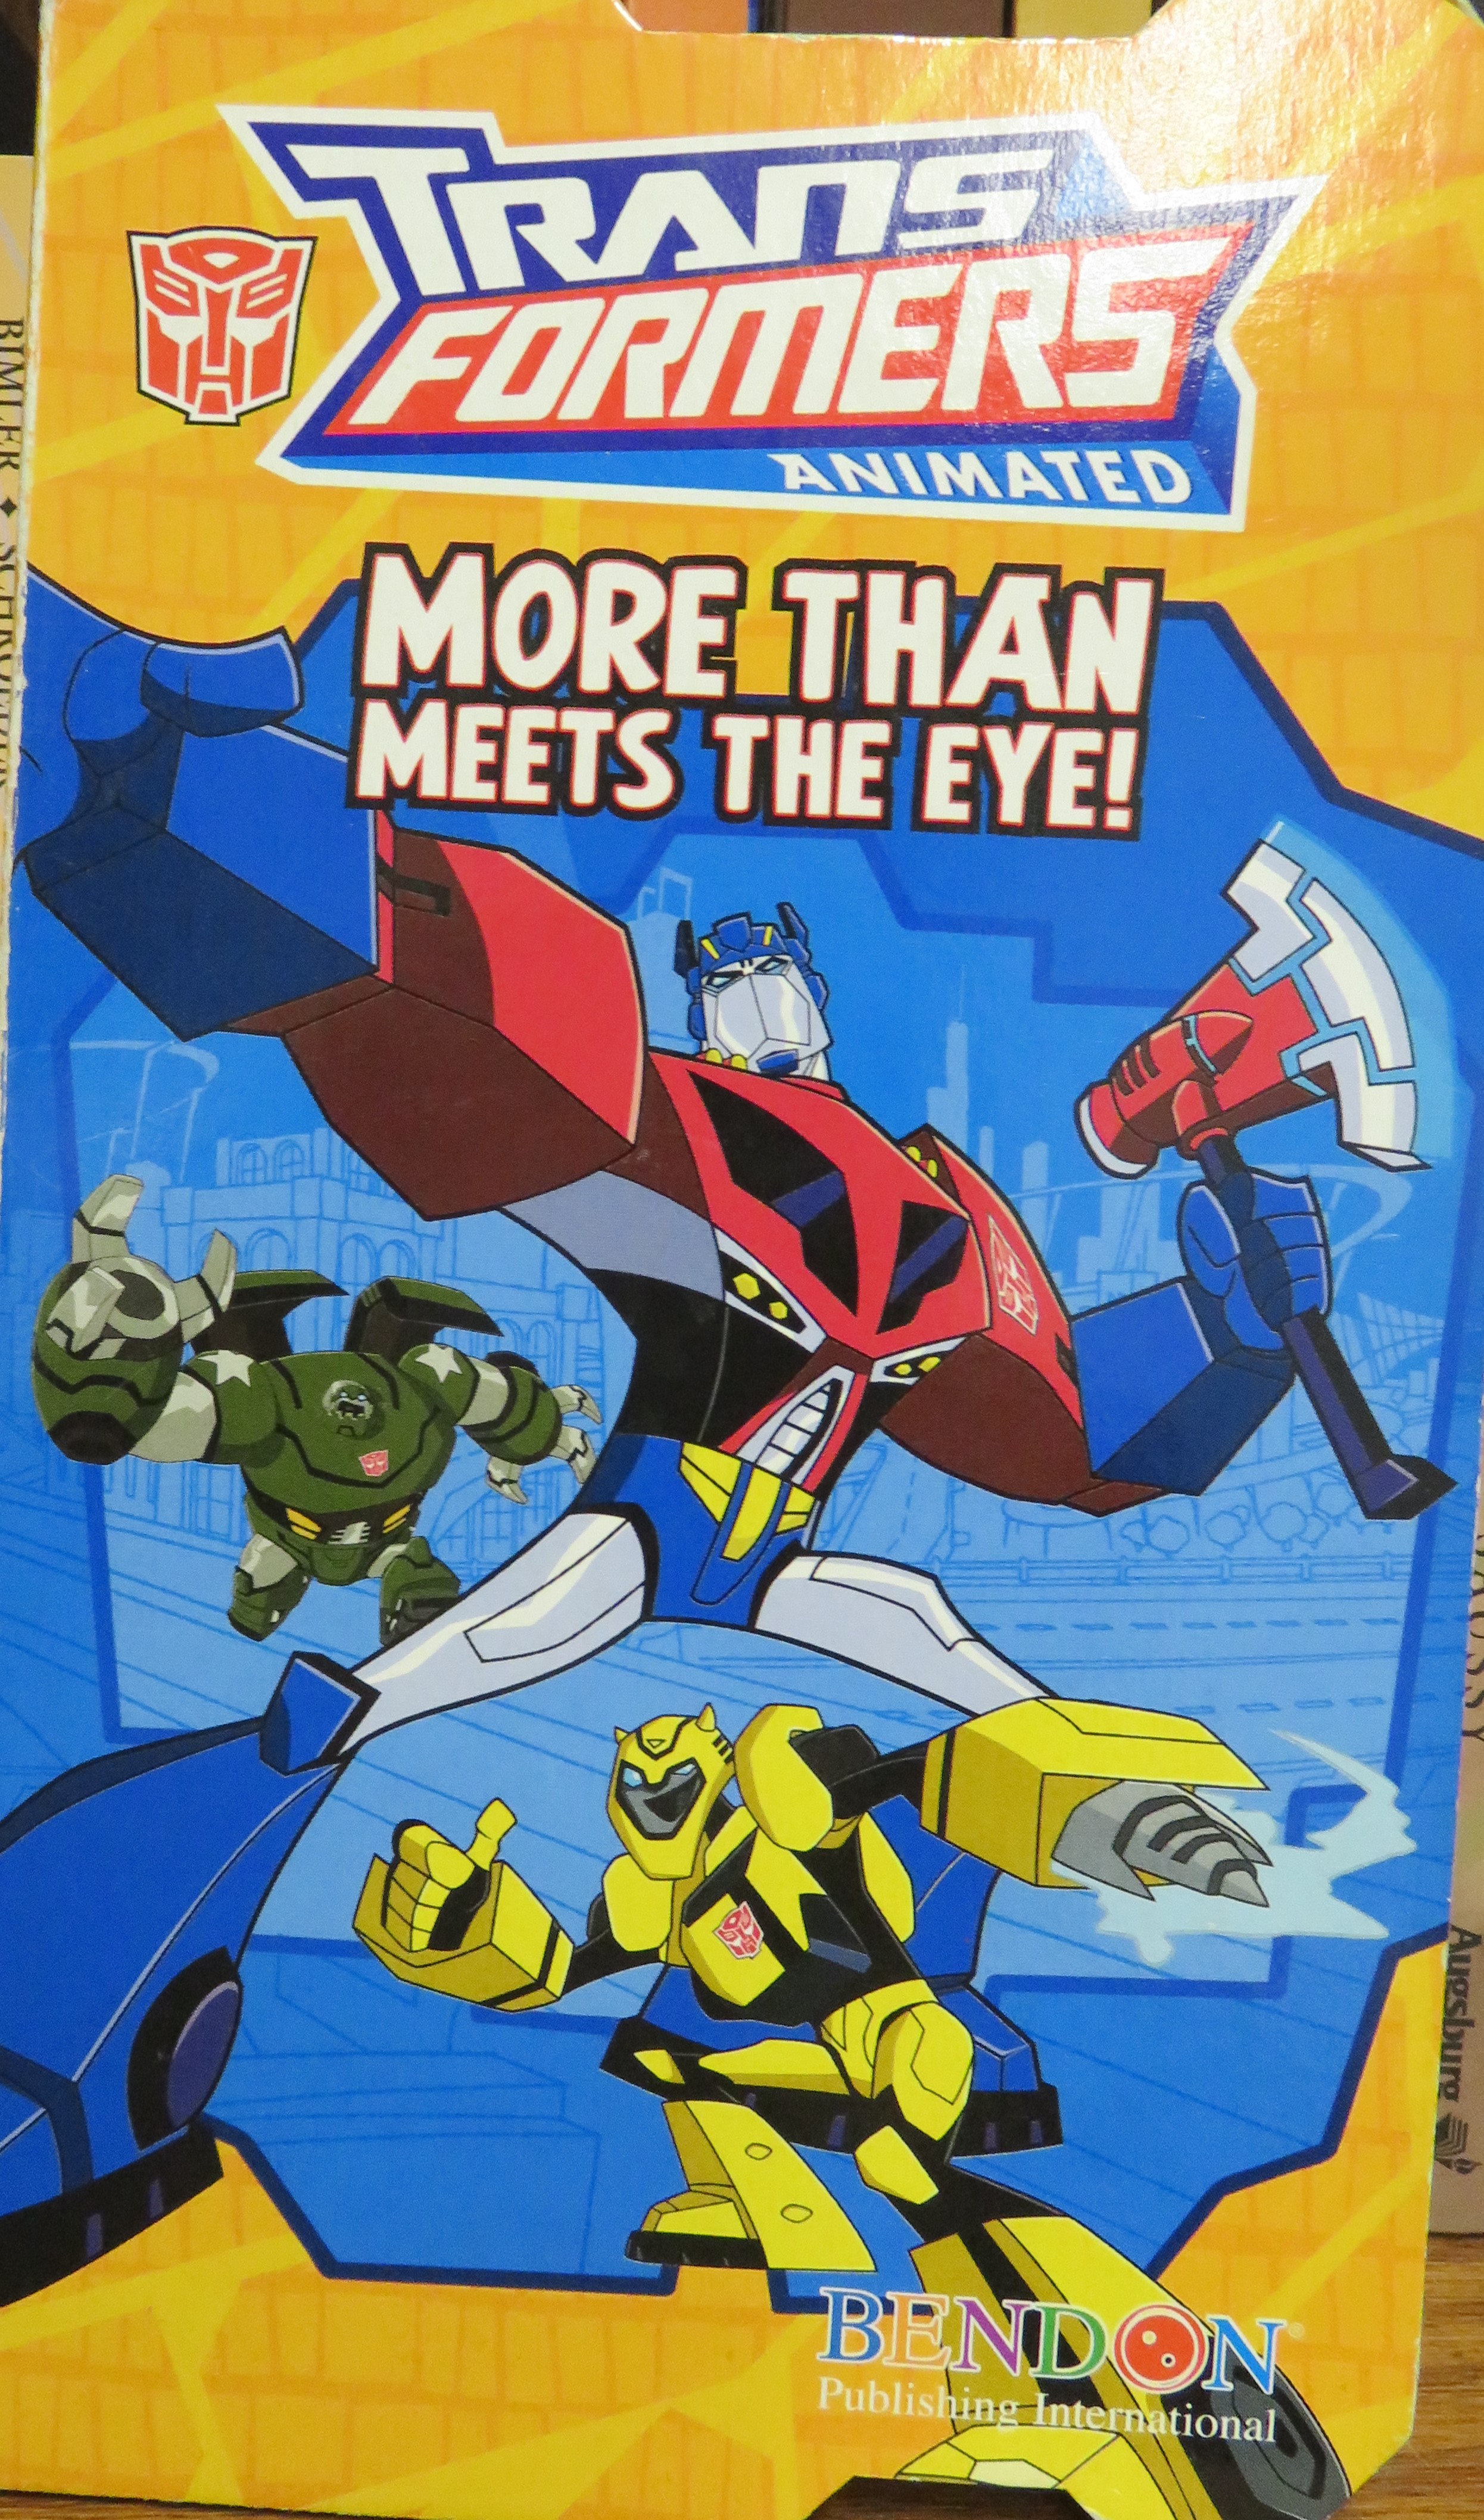 Transformers More Than Meets the Eye!